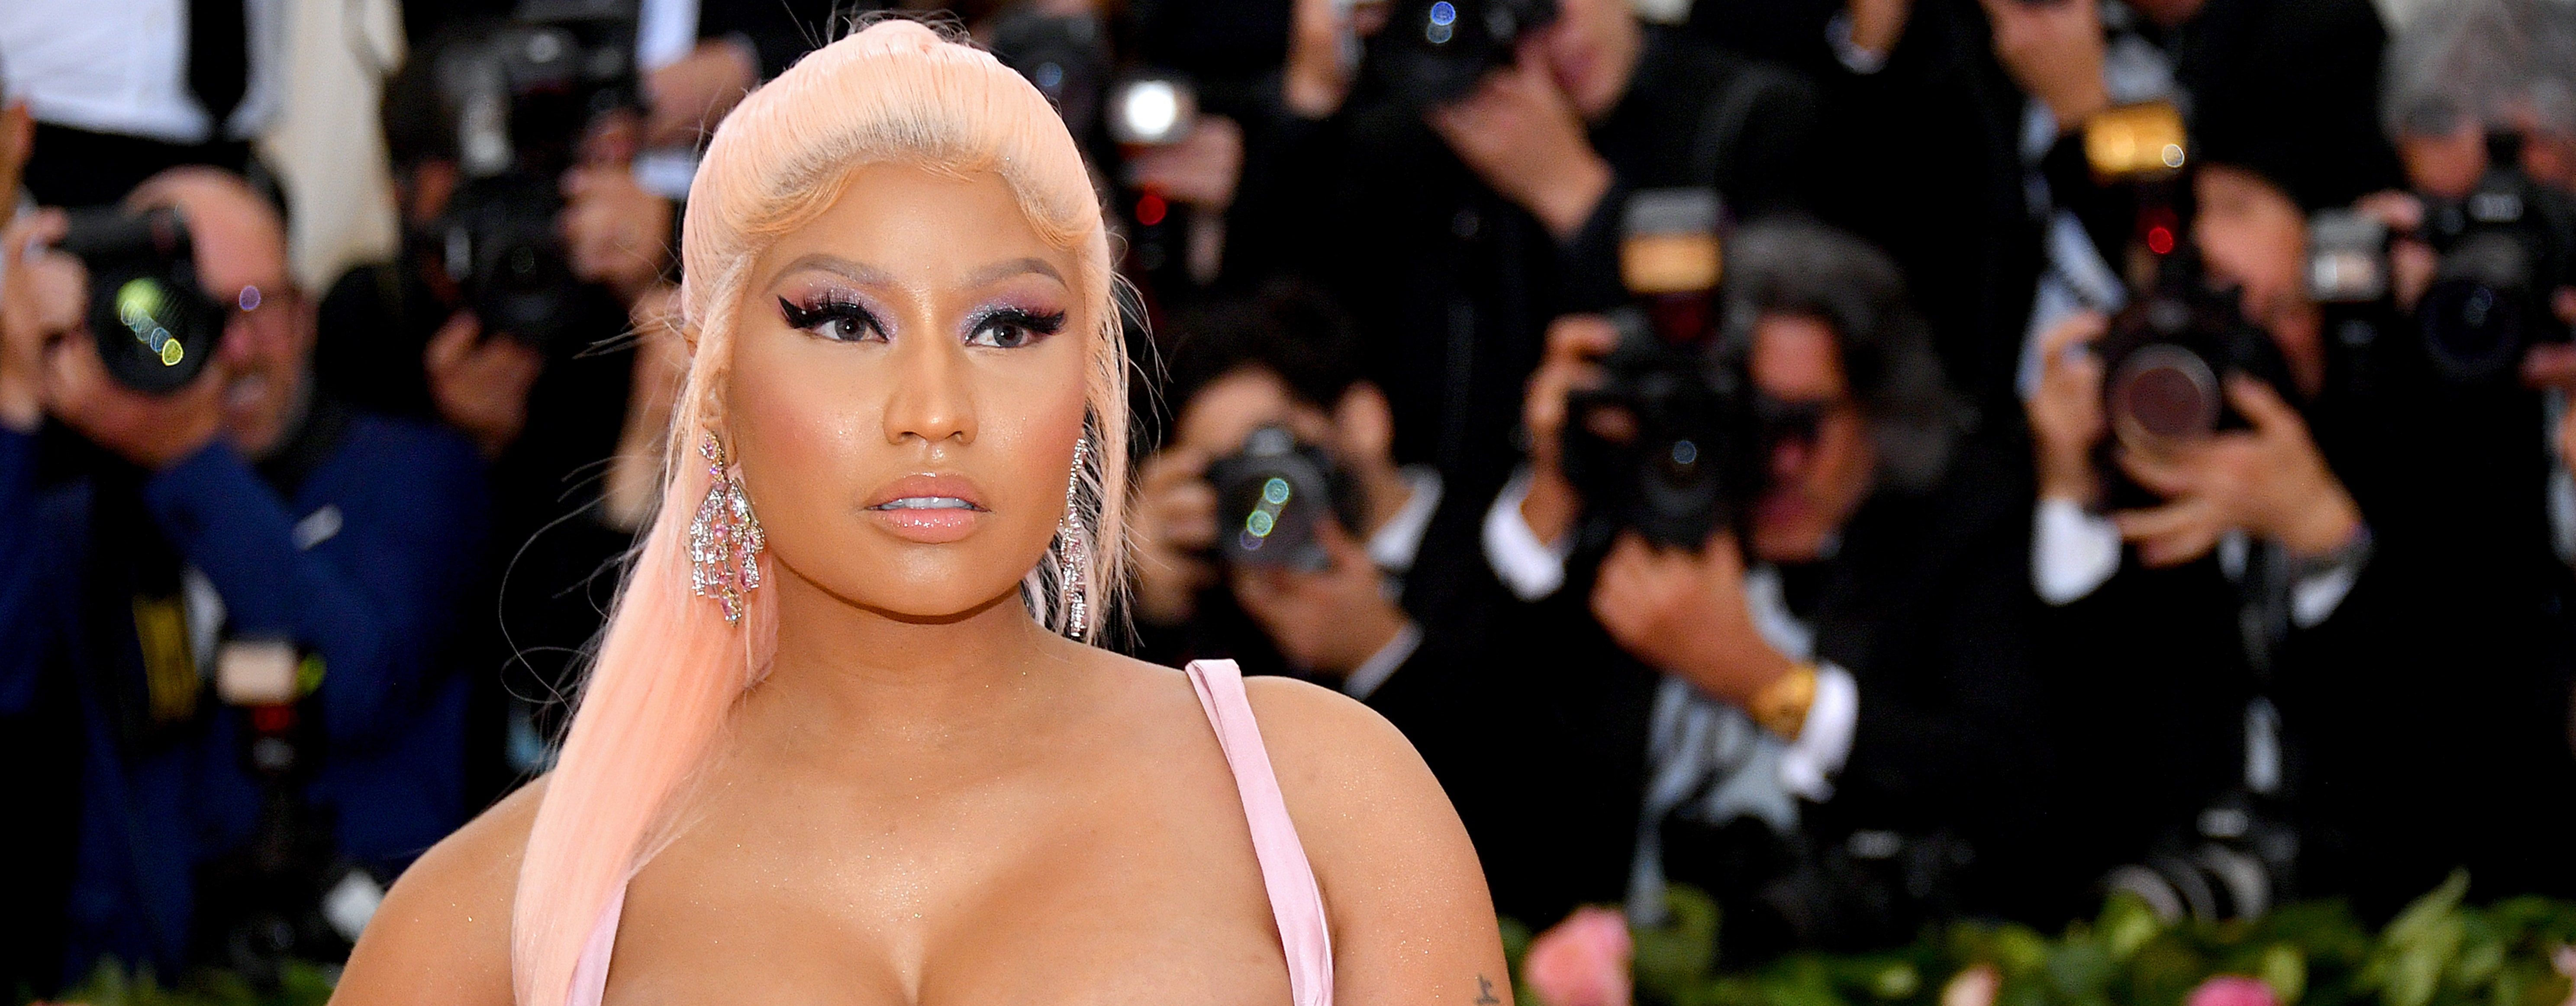 Nicki Minaj Is Pregnant—And Her Pregnancy Reveal Photo Are Stunning